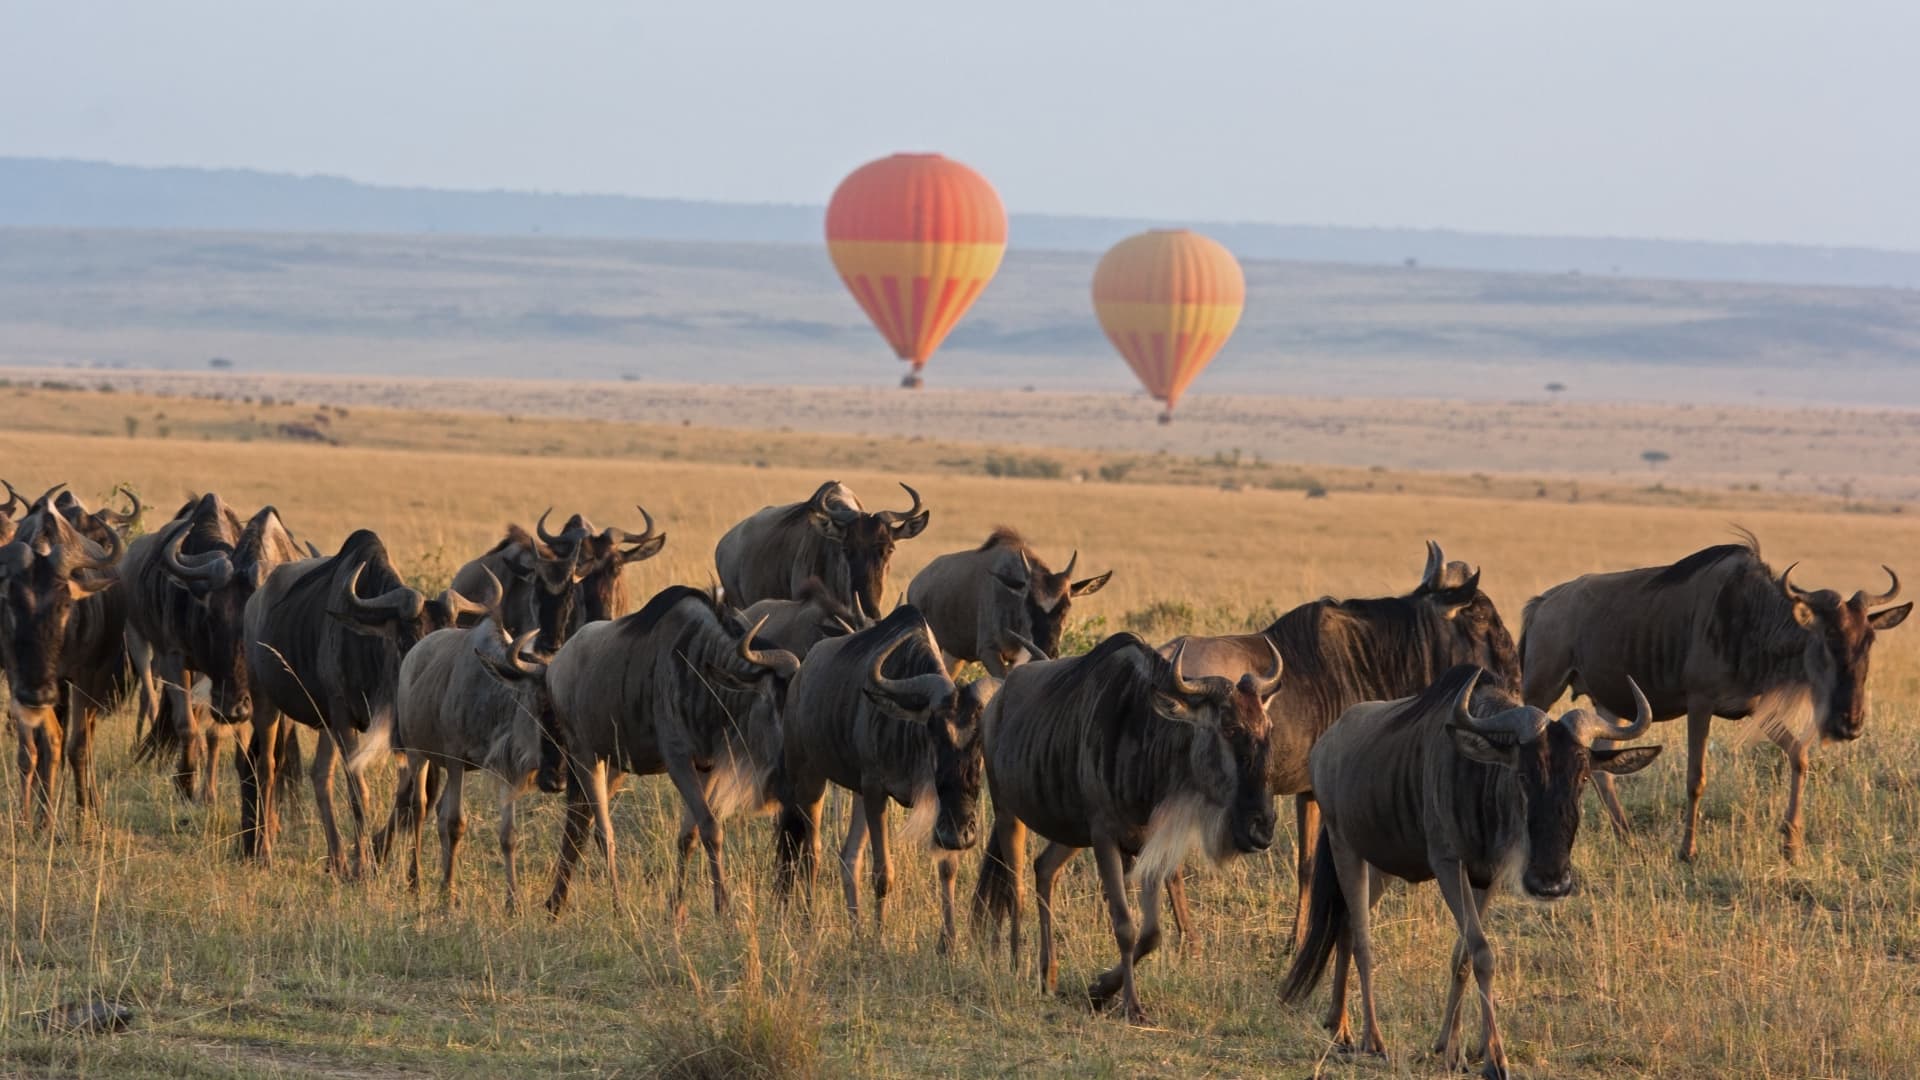 Known as one of the eight wonders of the world because of the wildebeest migration, Masaai Mara is one of Africa's most renowned parks, said travel journalist Harriet Akinyi.